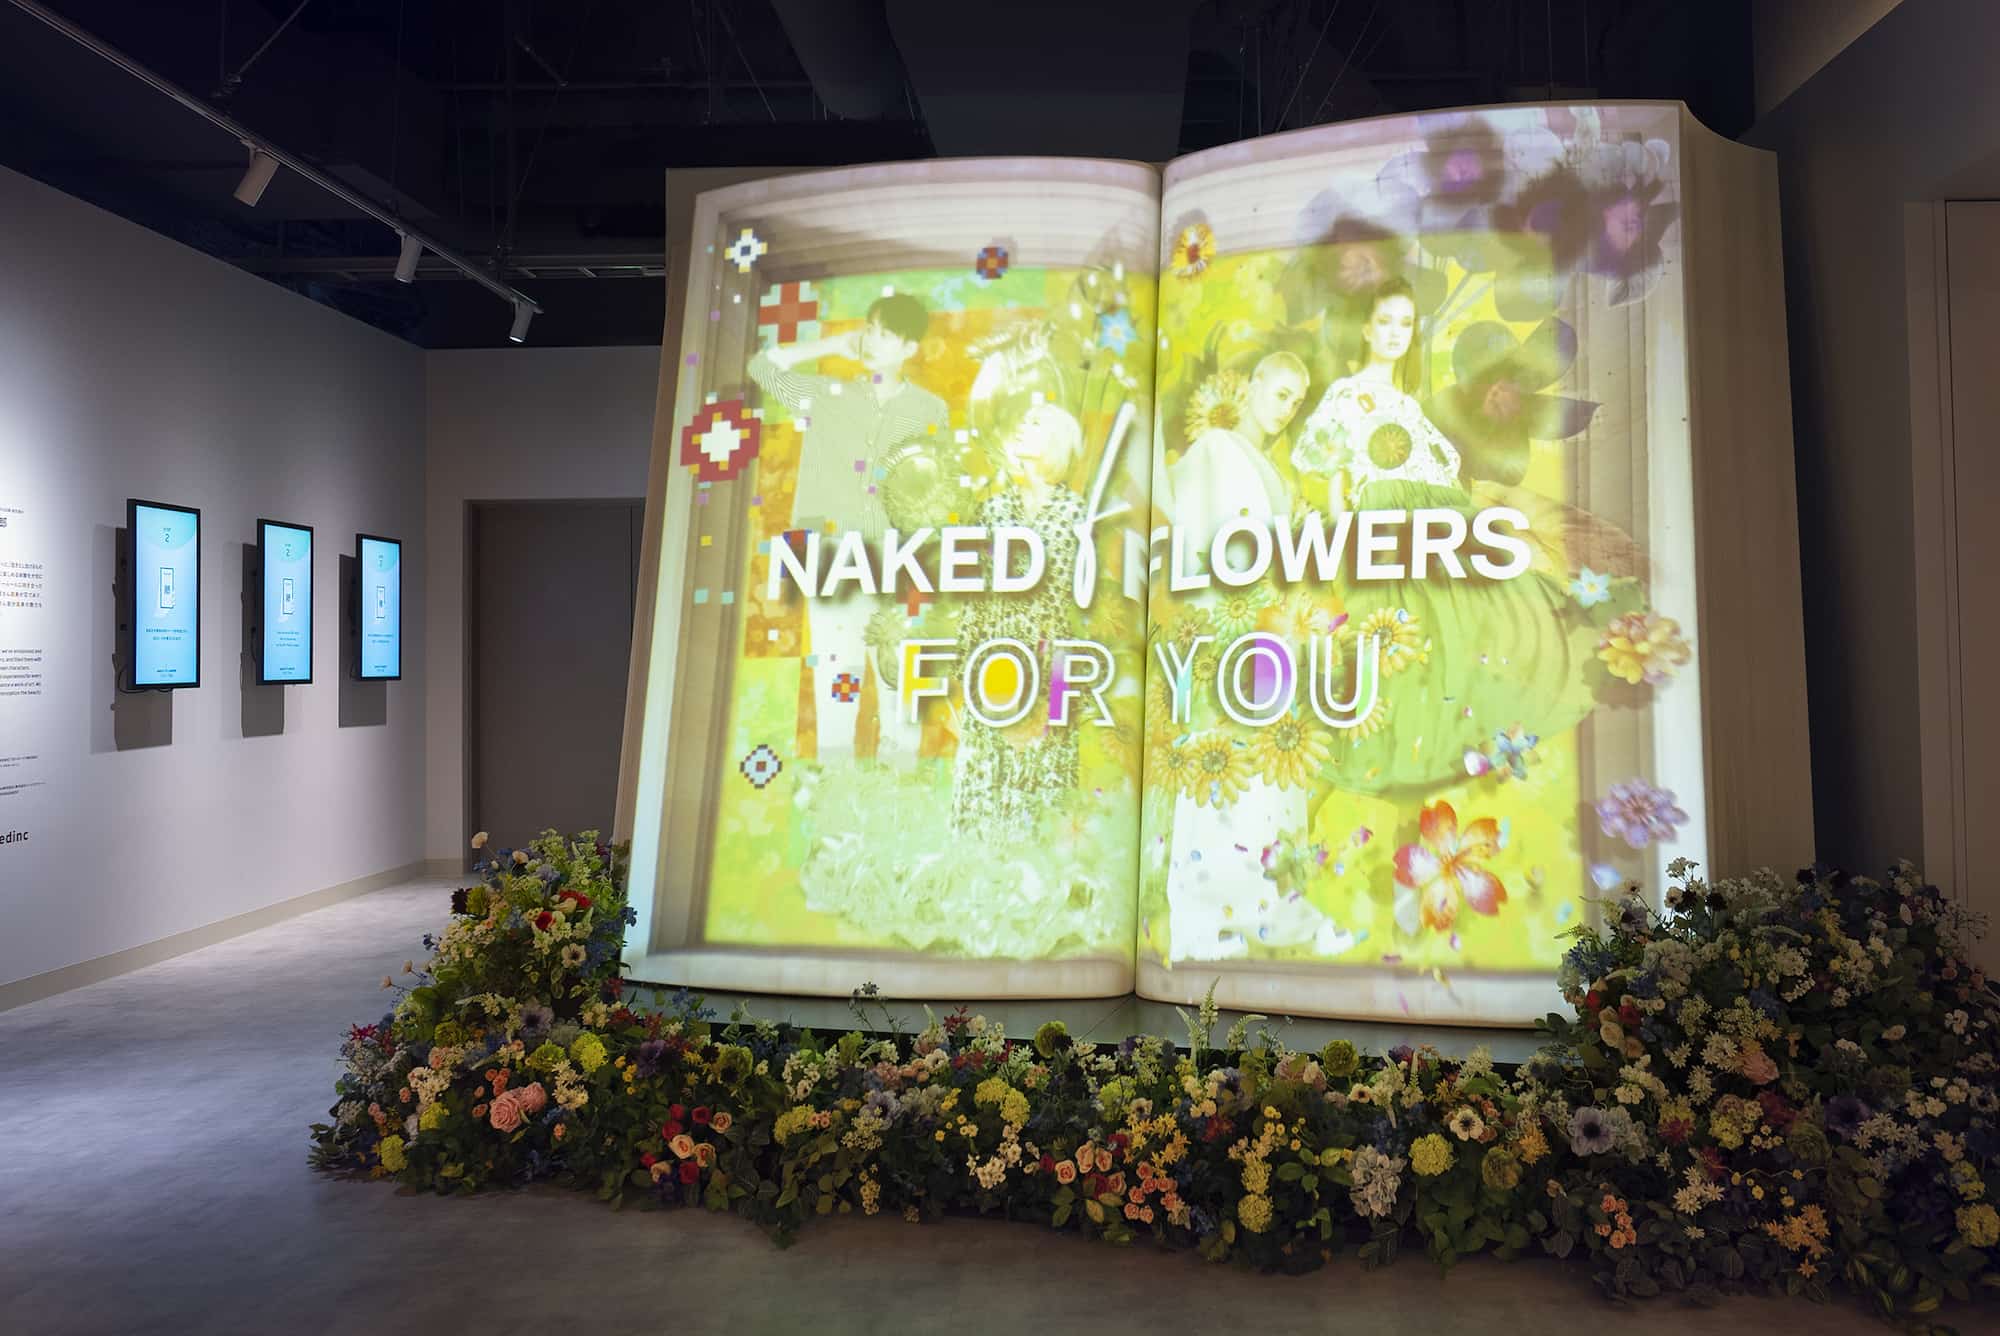 NAKED FLOWERS FOR YOU | 作品詳細公開